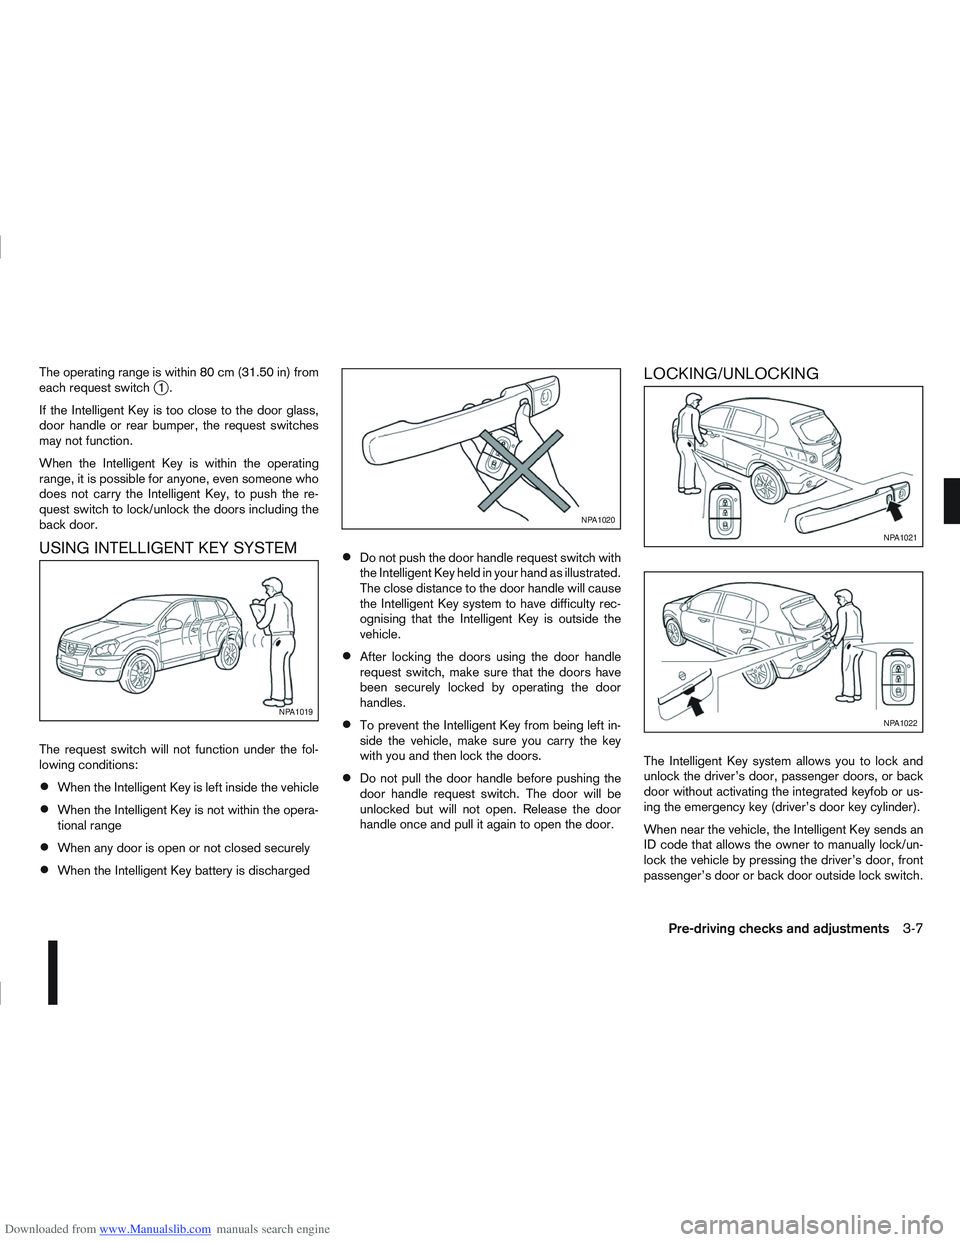 NISSAN QASHQAI 2011  Owners Manual Downloaded from www.Manualslib.com manuals search engine The operating range is within 80 cm (31.50 in) from
each request switchj1.
If the Intelligent Key is too close to the door glass,
door handle o